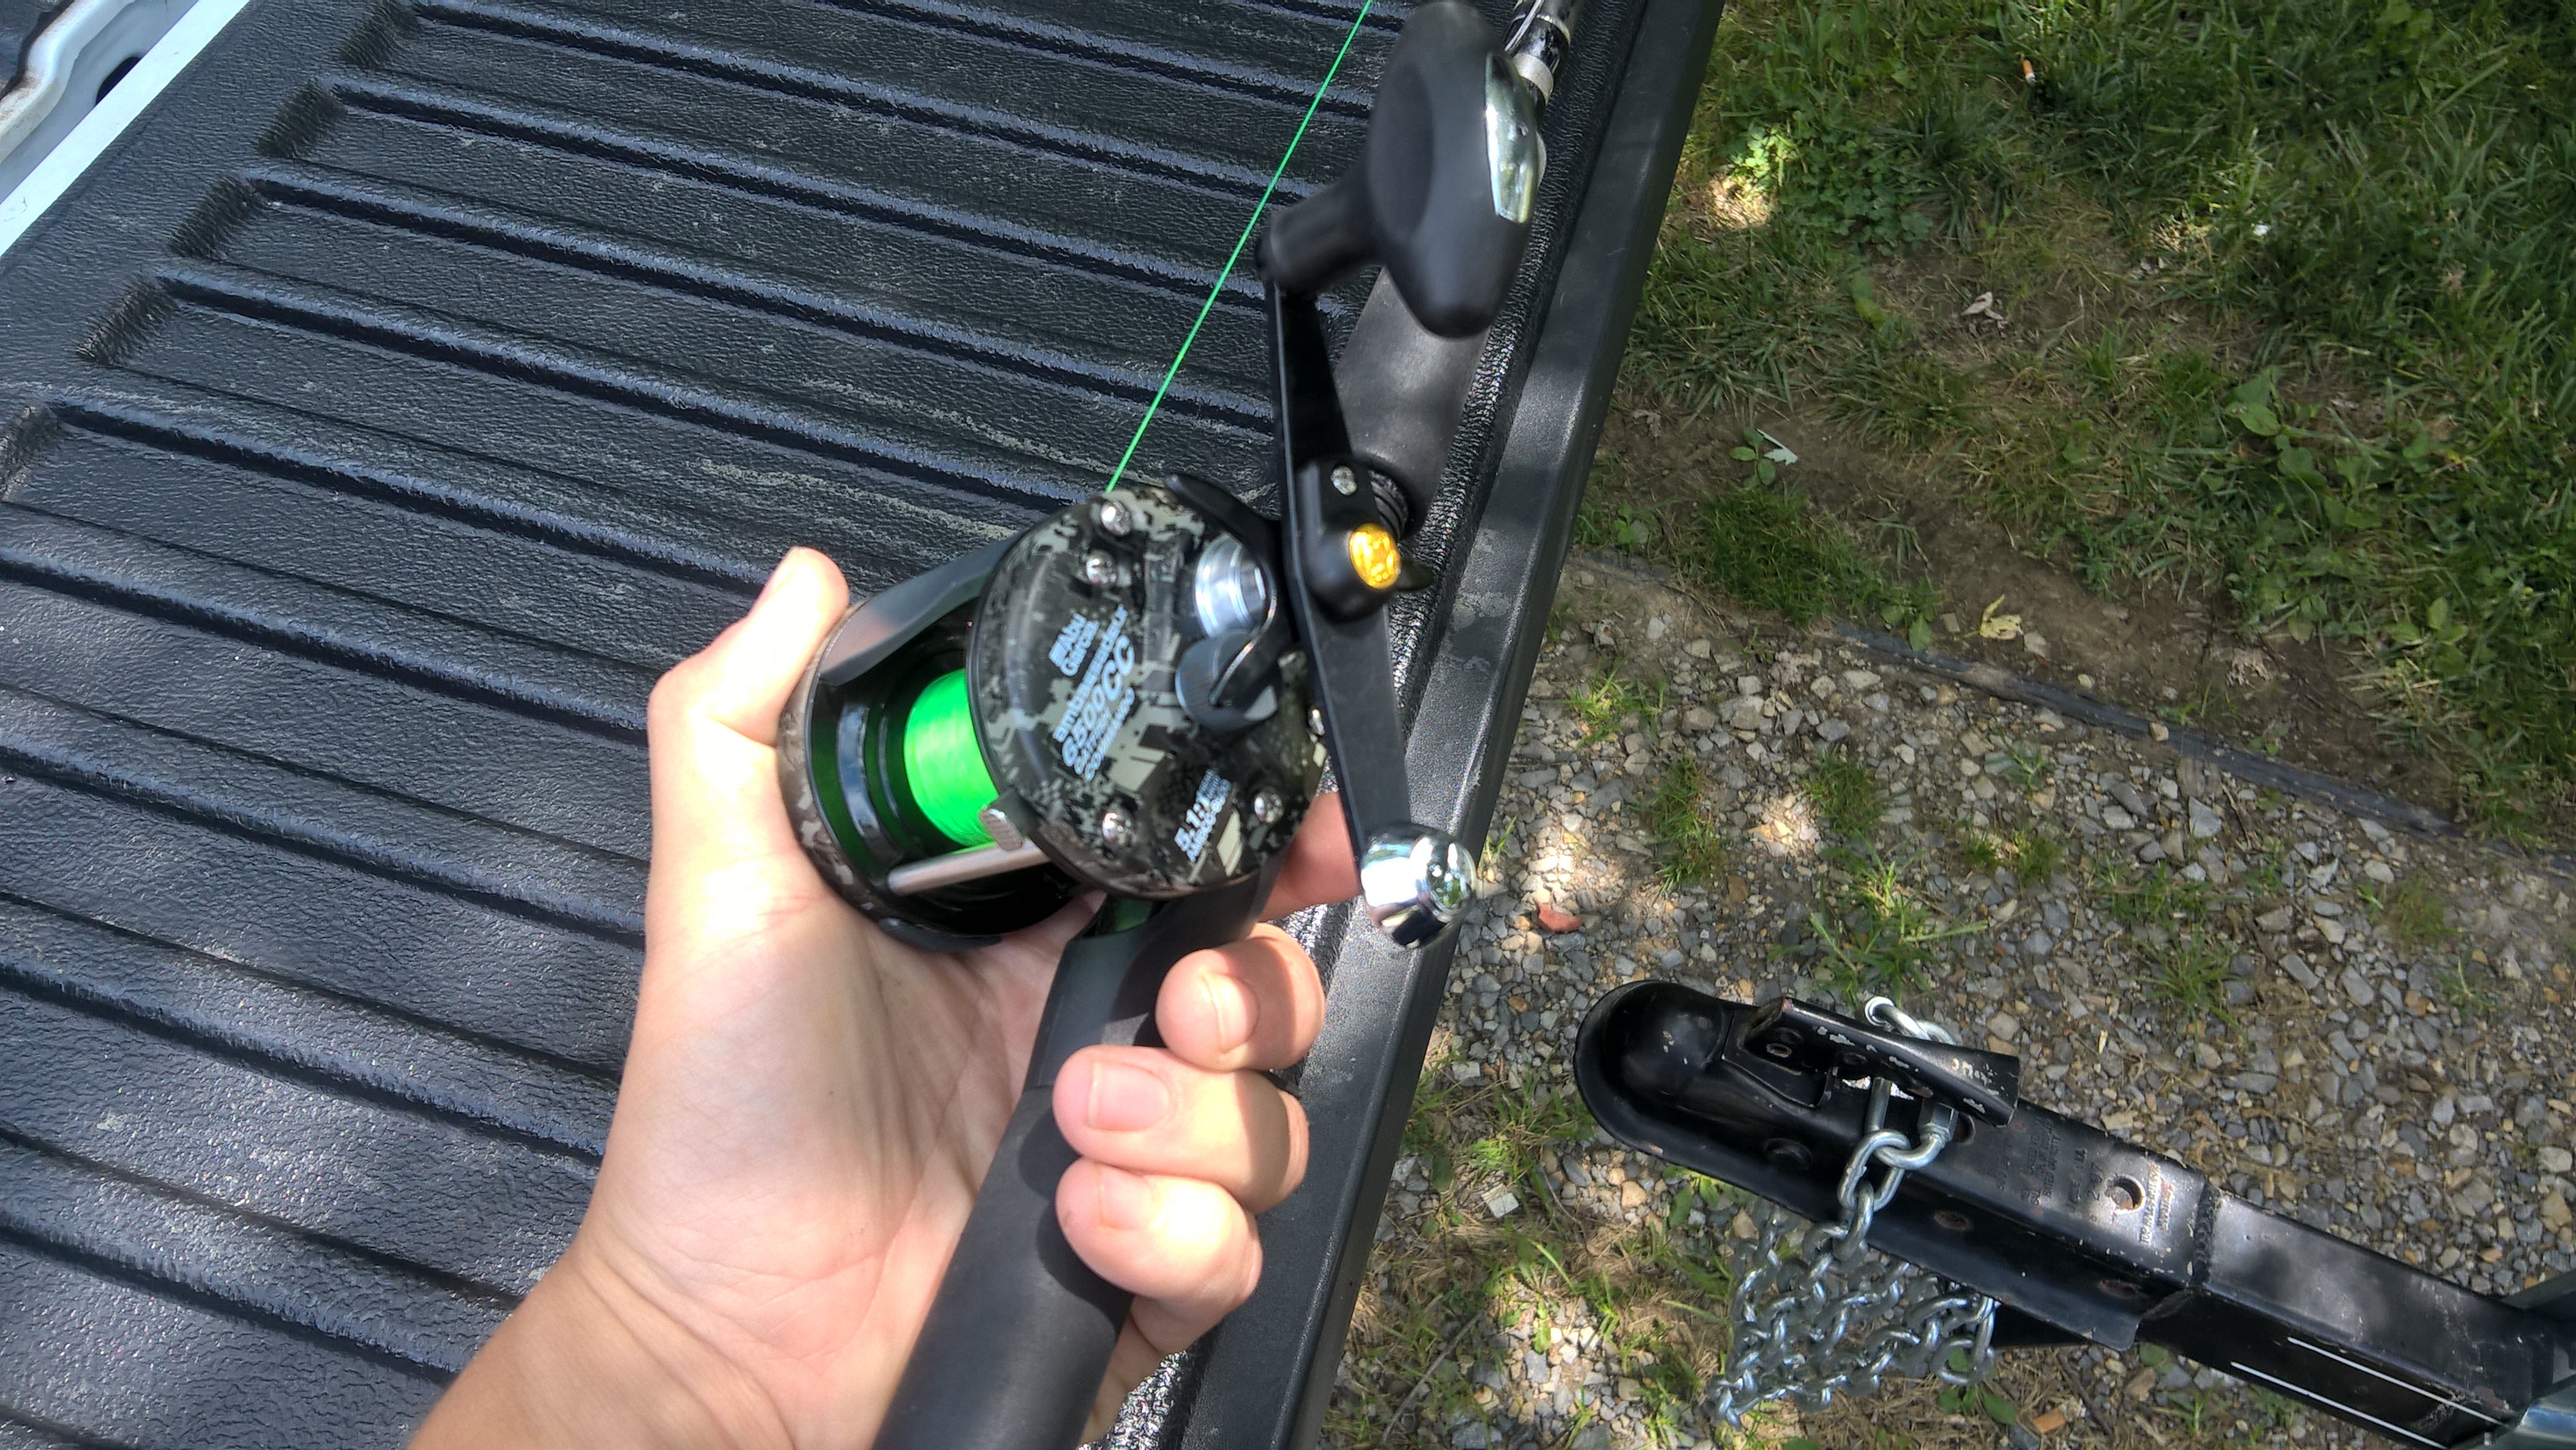 Abu Garcia Catfish Commando 6500 reel combo review and questions